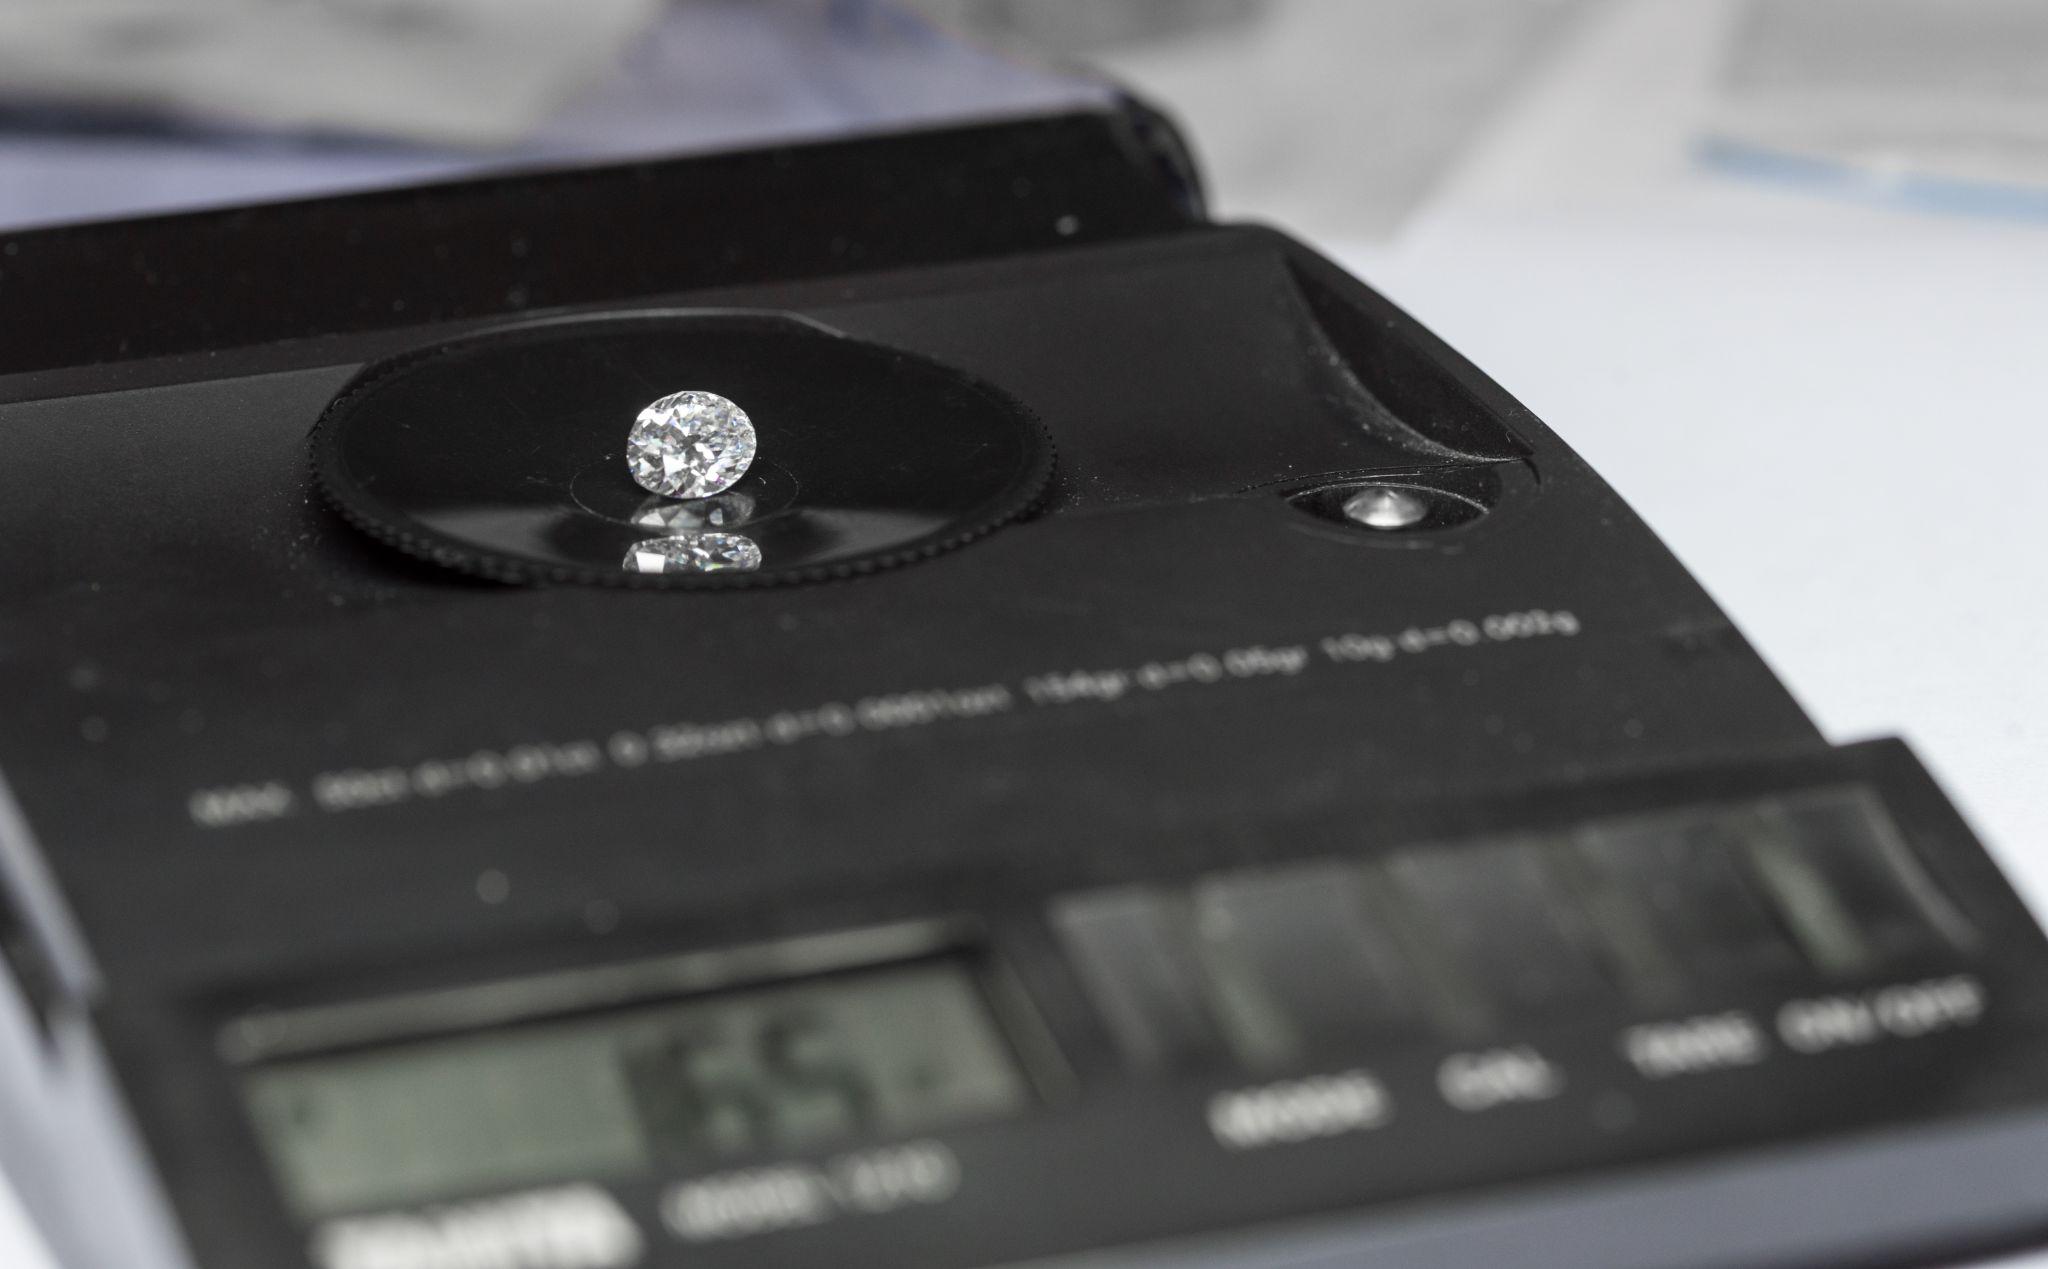 Diamond on a weight scale.